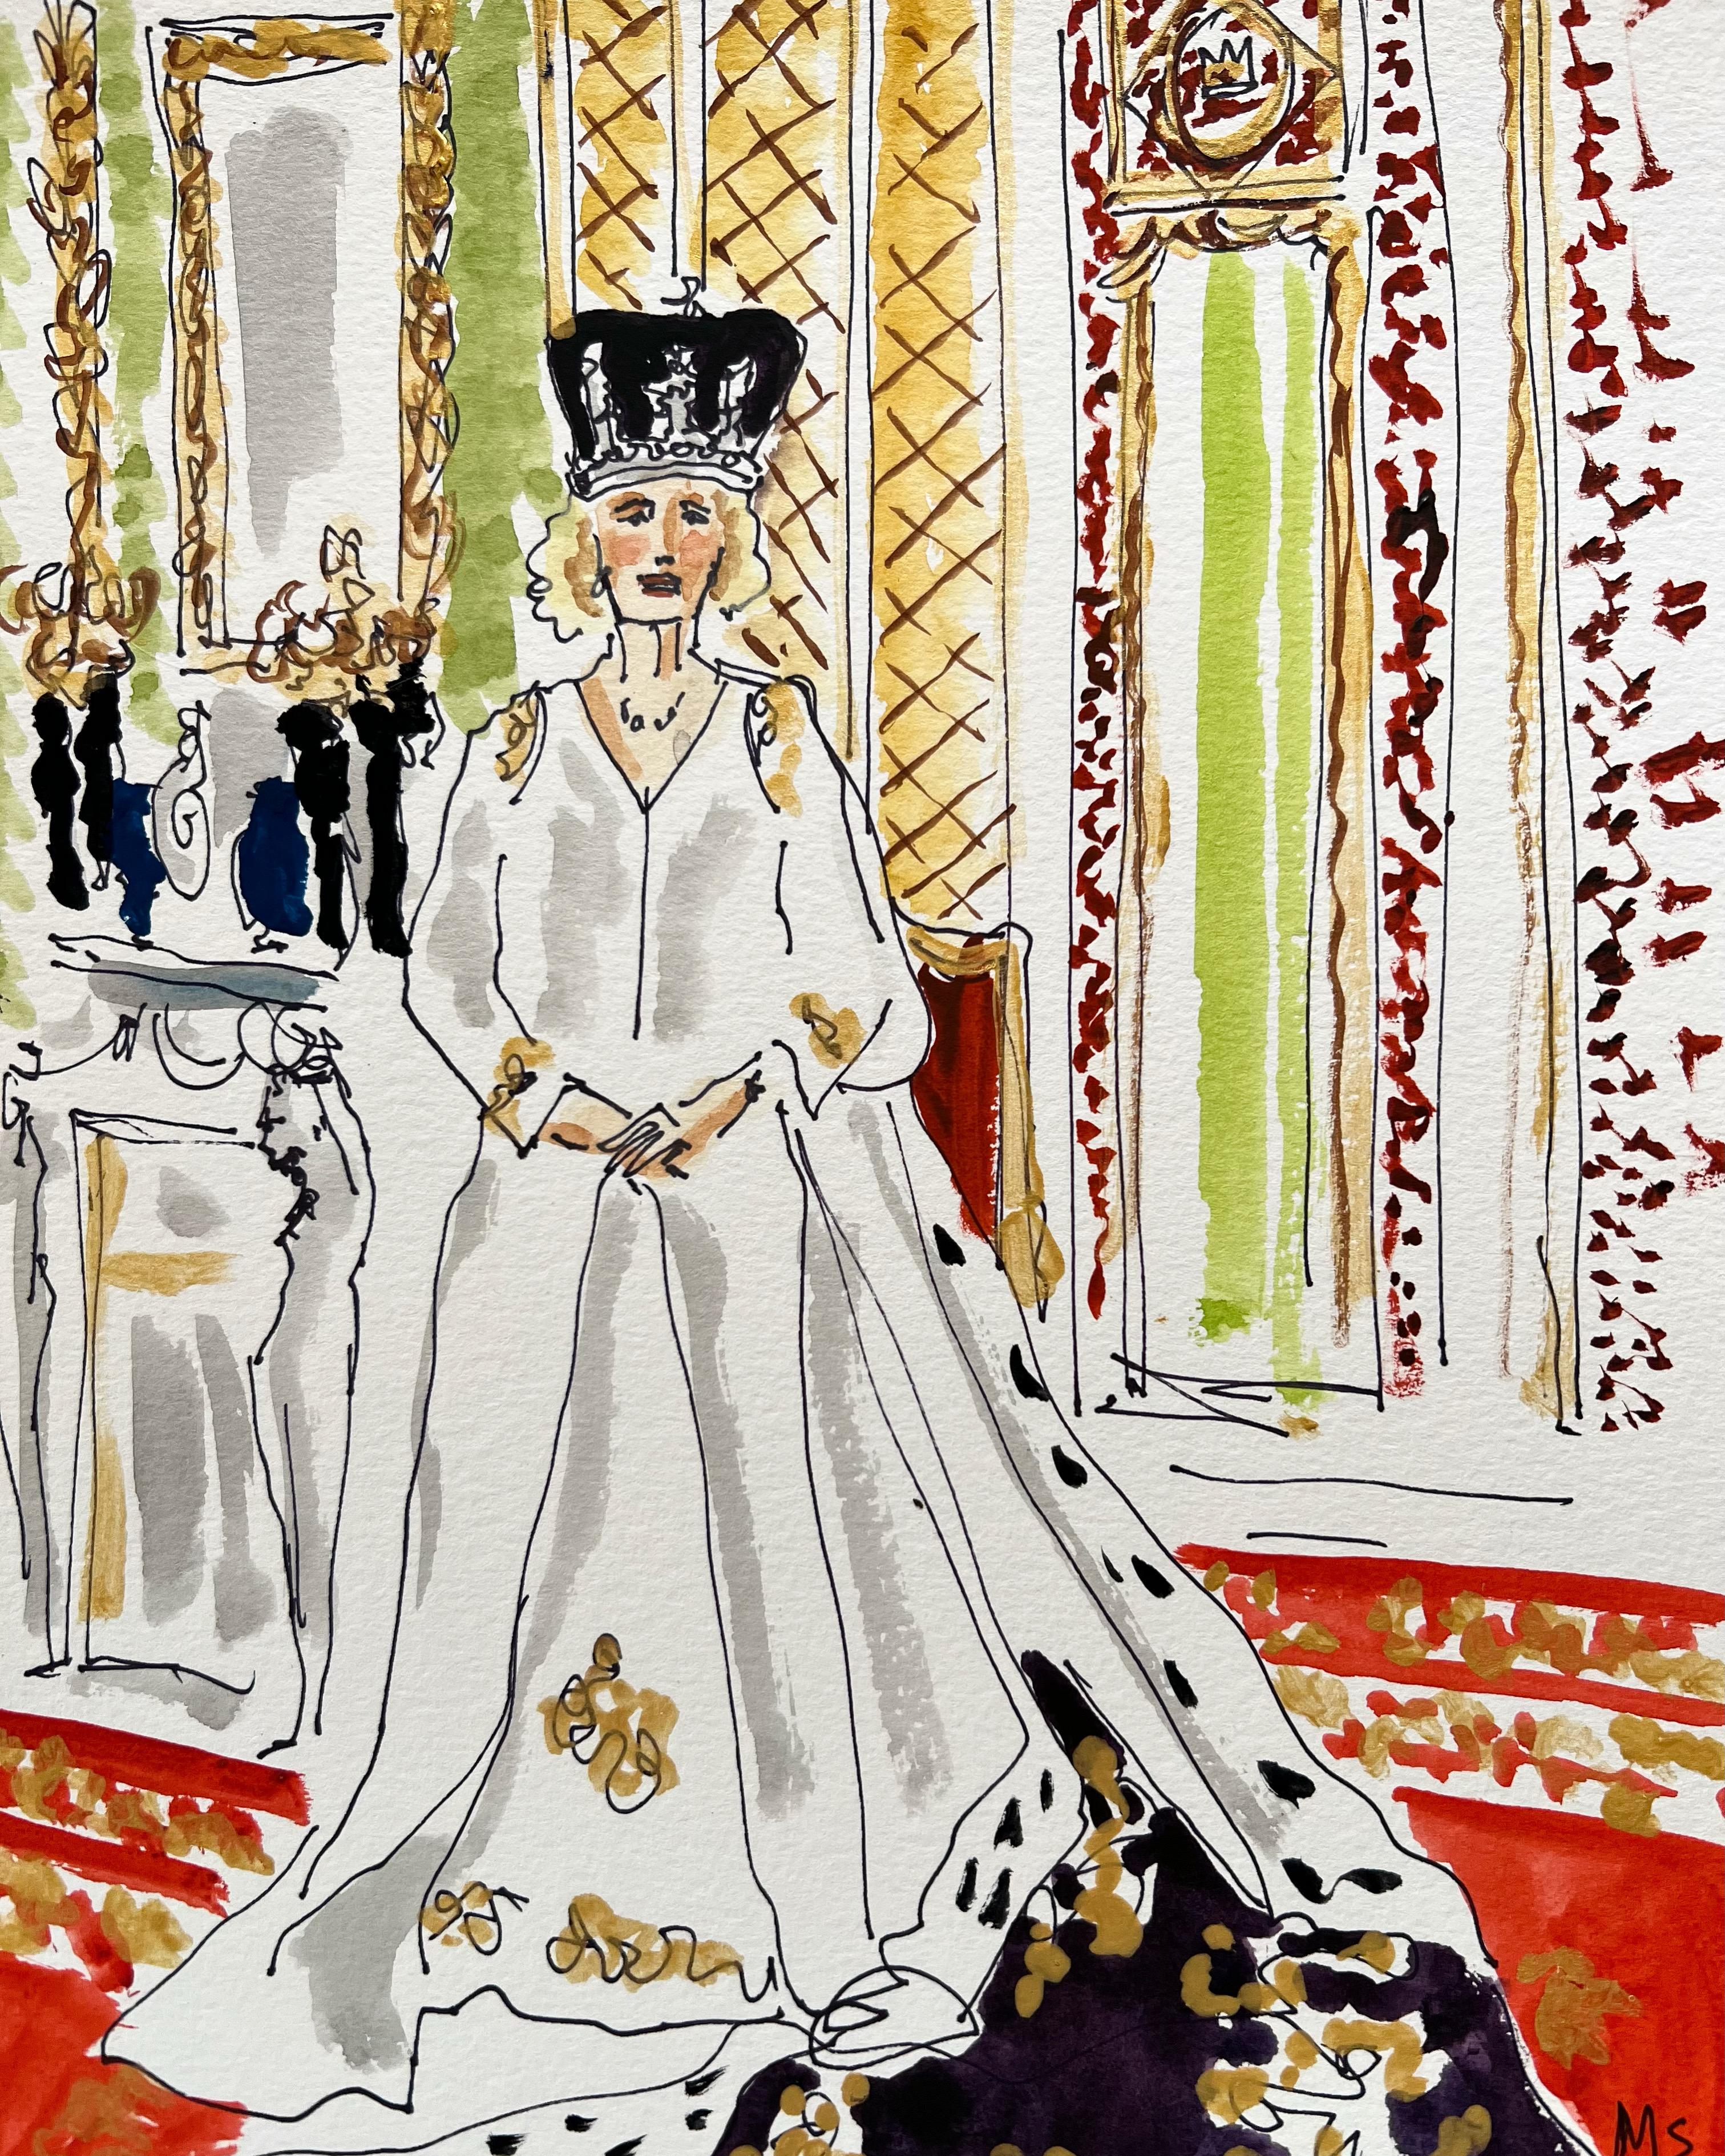 Queen Camilla, by Manuel Santelices
Ink, watercolor, and gouache on paper
Image size: 12 in. H x 9 in. W 
Unframed
2023

The worlds of fashion, society, and pop culture are explored through the illustrations of Manuel Santelices, a Chilean artist